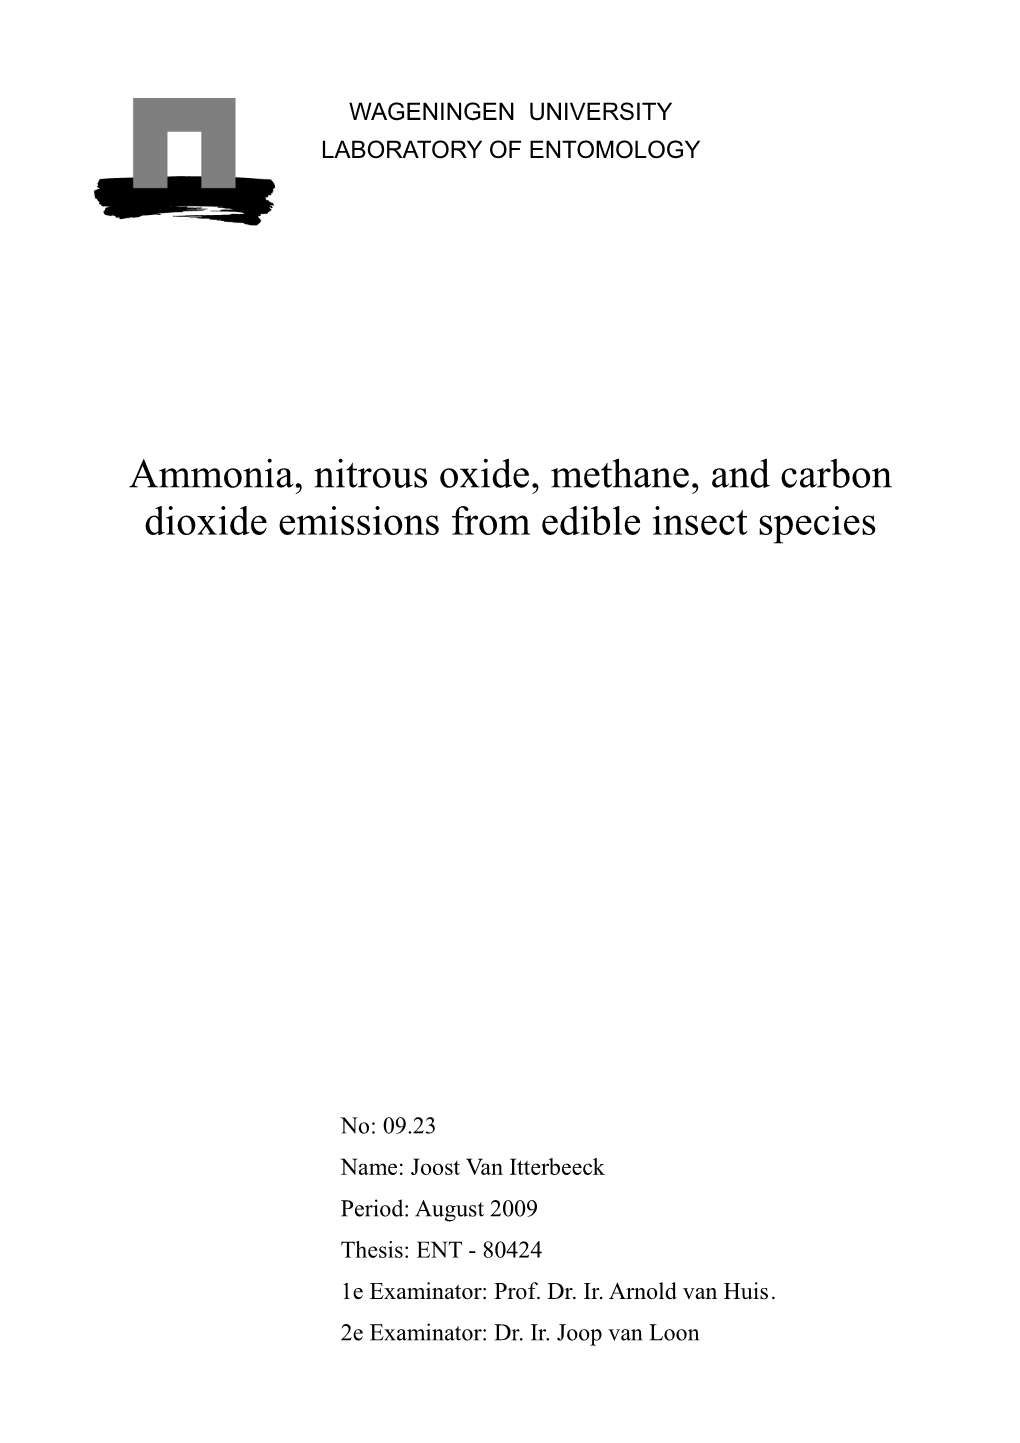 Ammonia, Nitrous Oxide, Methane, and Carbon Dioxide Emissions from Edible Insect Species